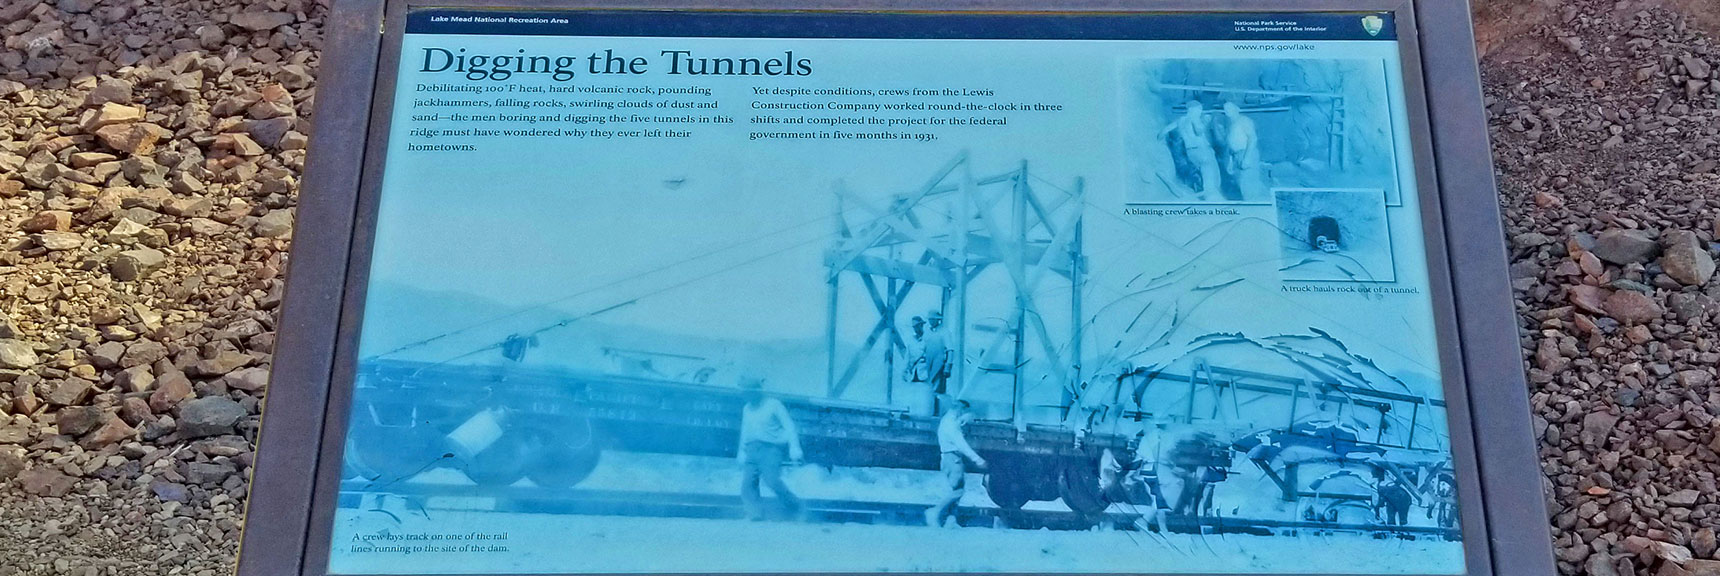 The 5-Tunnel Project Was Completed in Just 5 Months in 1931 | Historic Railroad Trail | Lake Mead National Recreation Area, Nevada